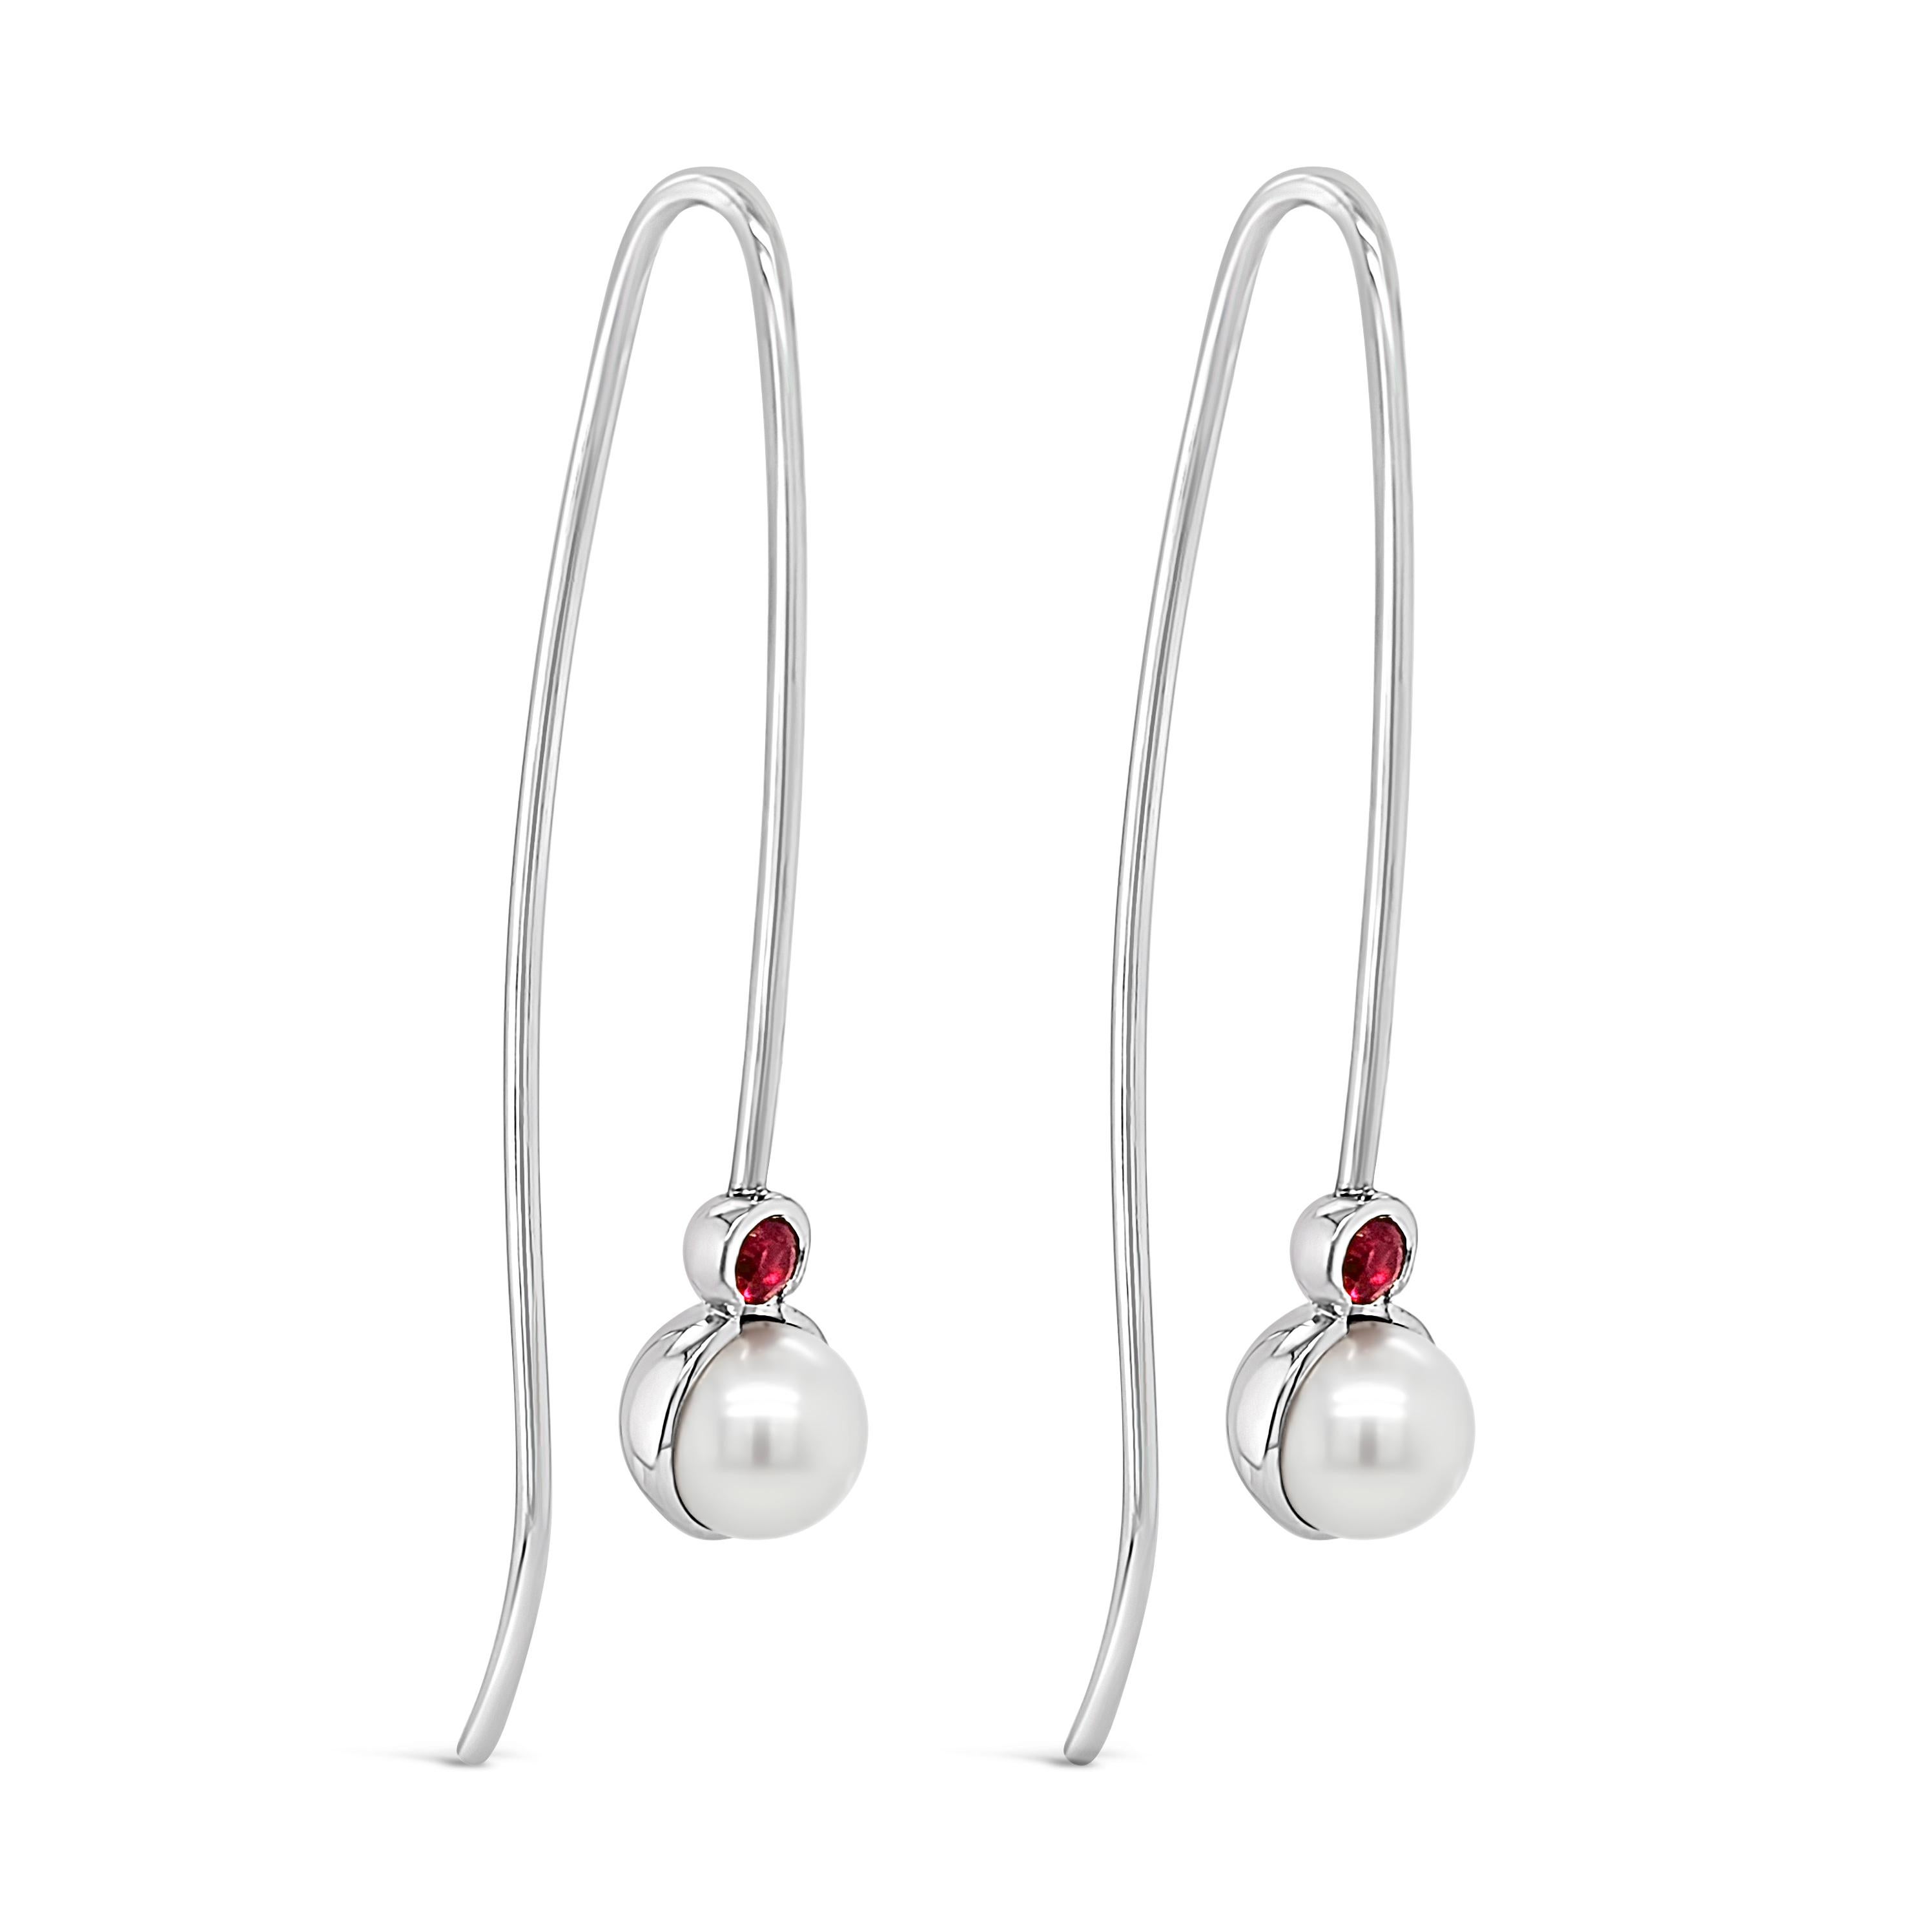 Artisan  18ct White Gold & Pearl Earrings Featuring Rubies 